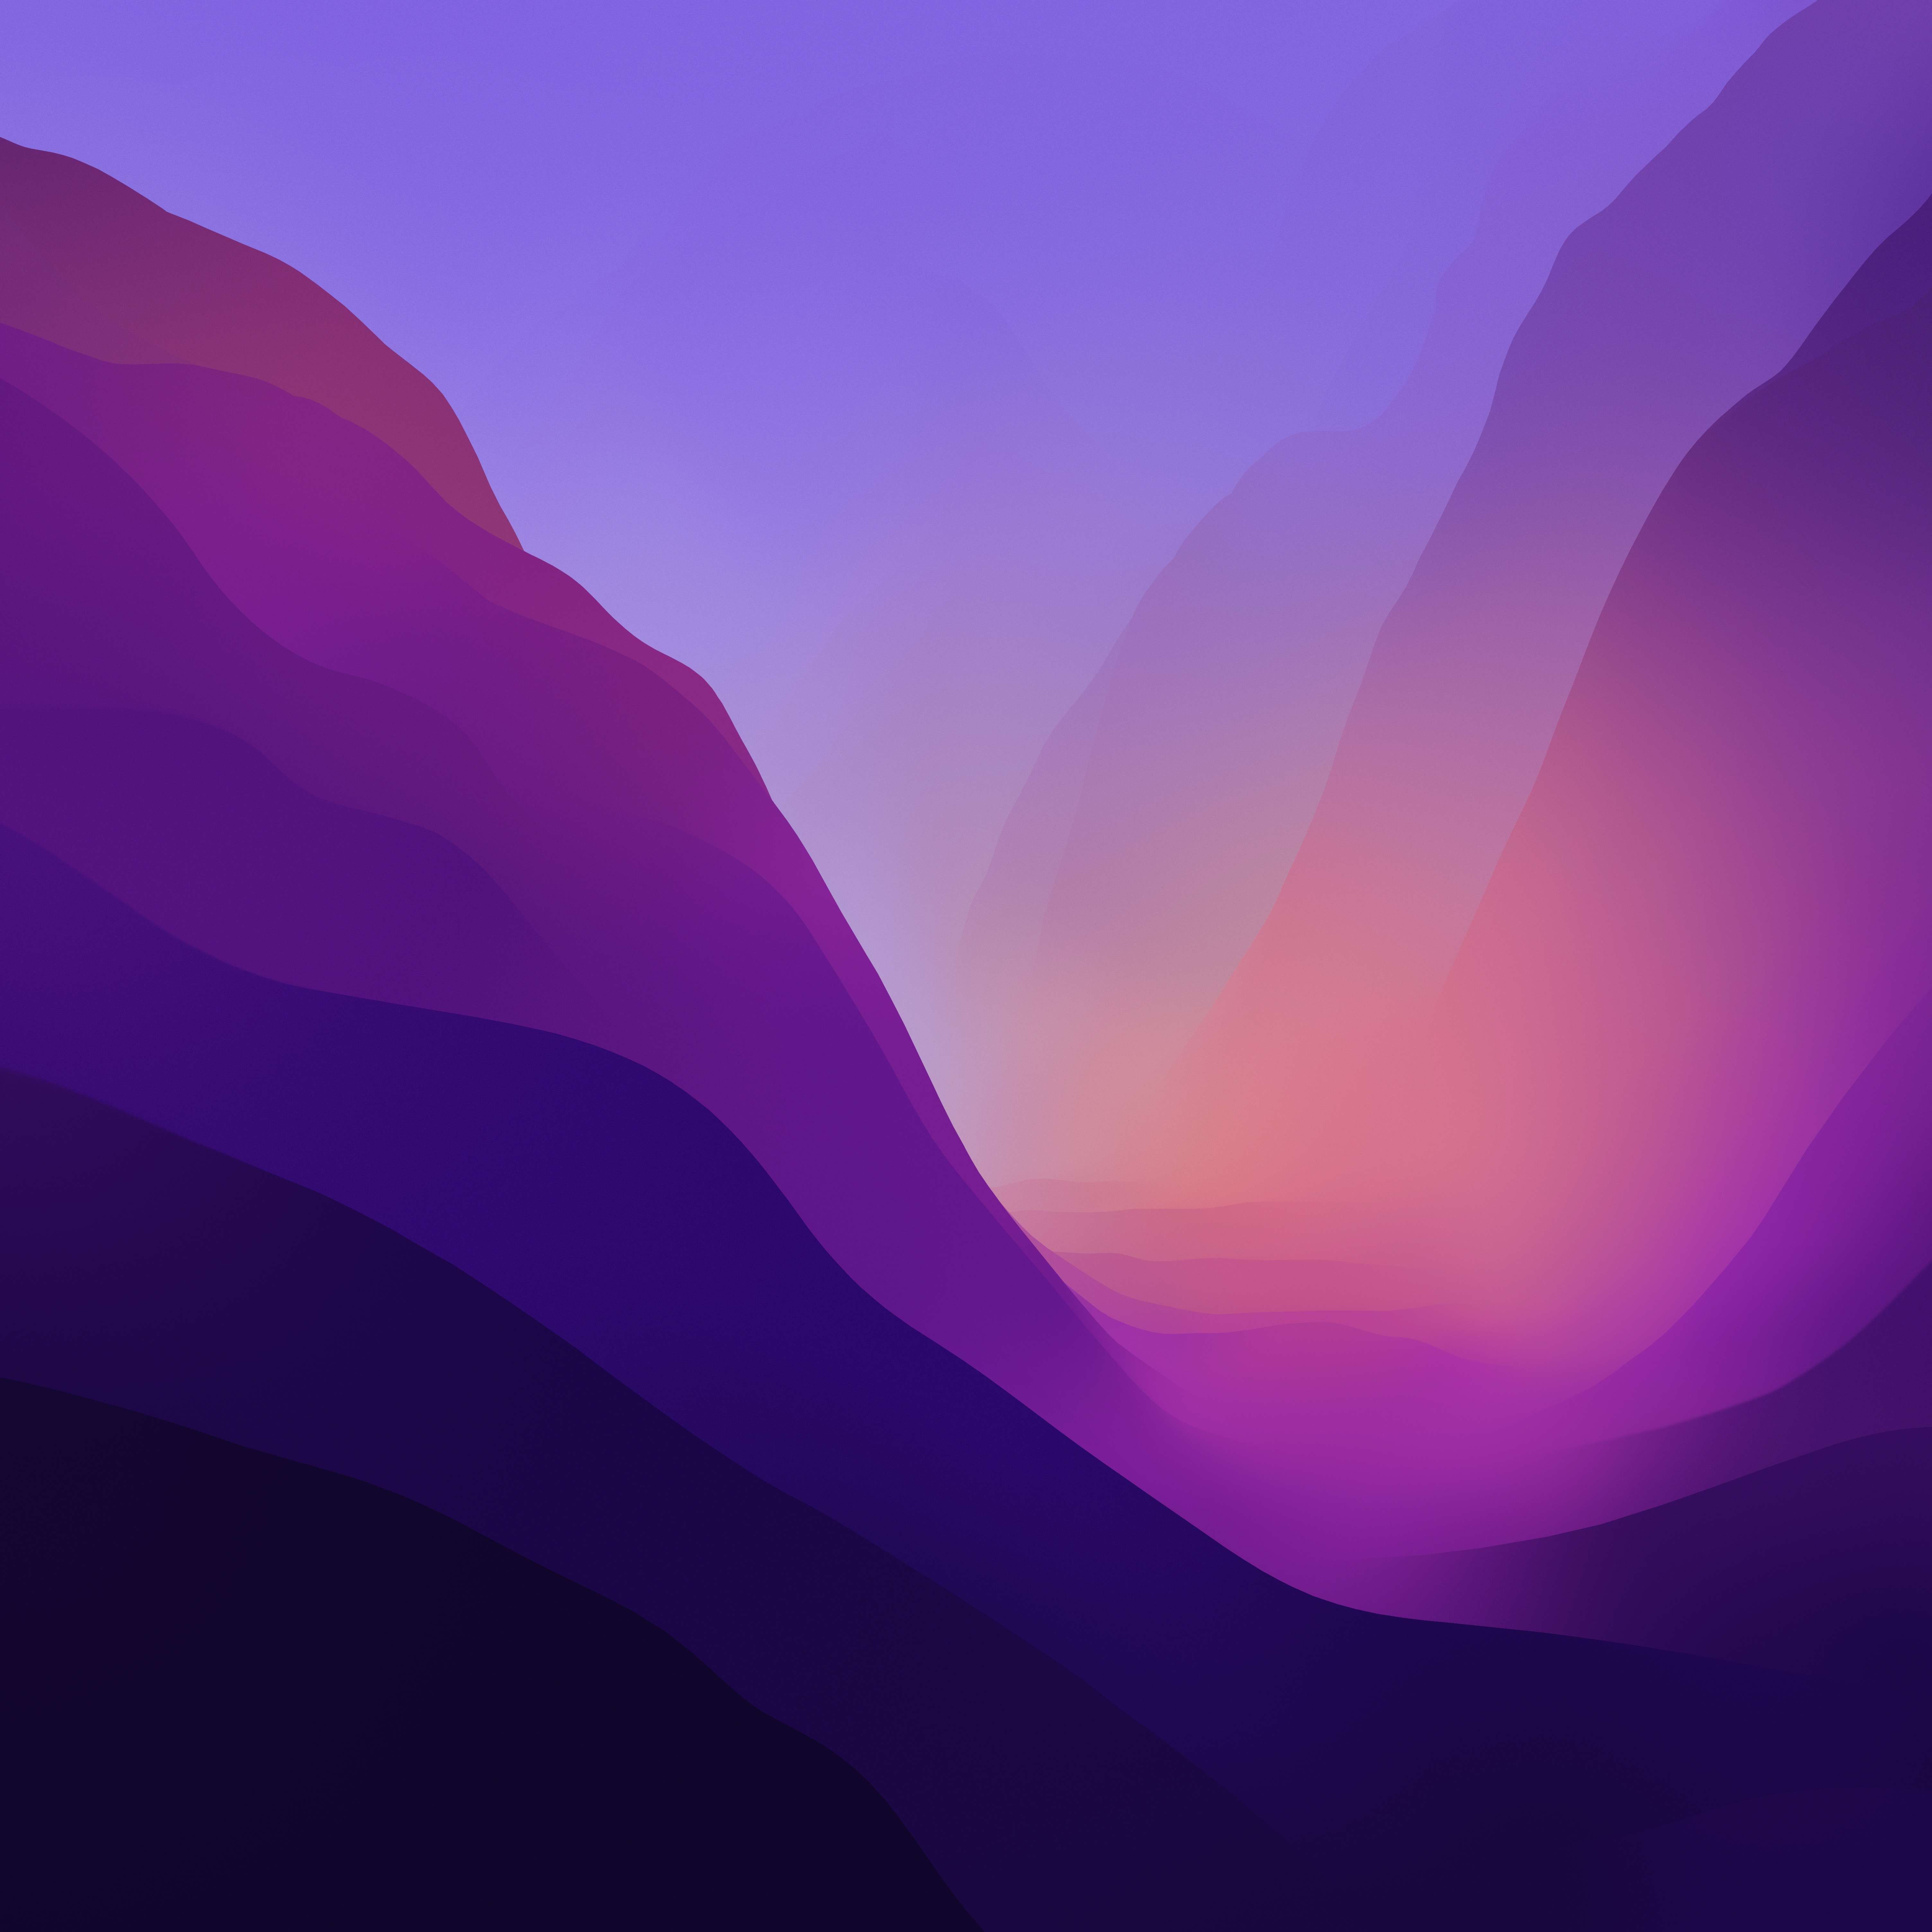 Colorful background Wallpaper 4K, Abstract background, macOS Sierra